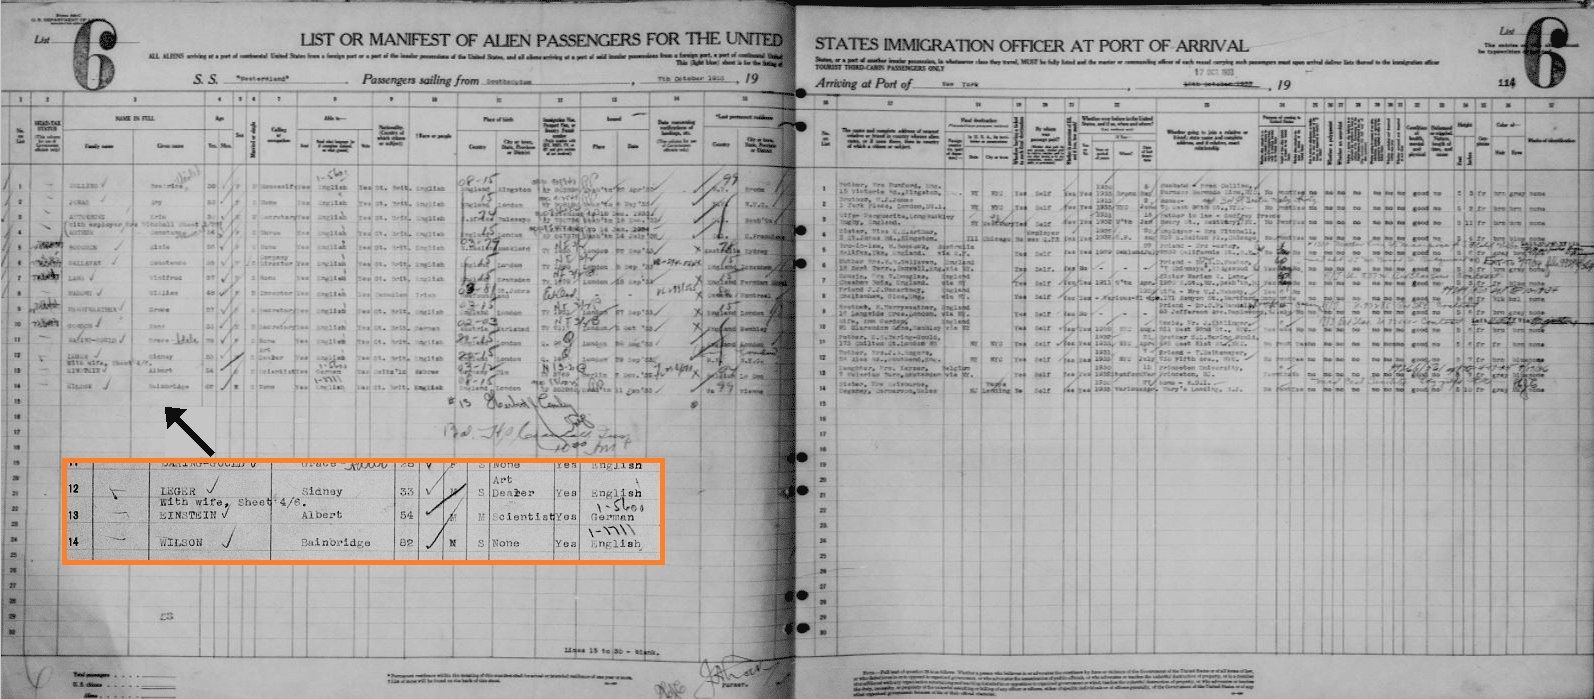 Record of Albert Einstein’s arrival in the U.S., from the Ellis Island and Other New York Passenger Lists collection on MyHeritage